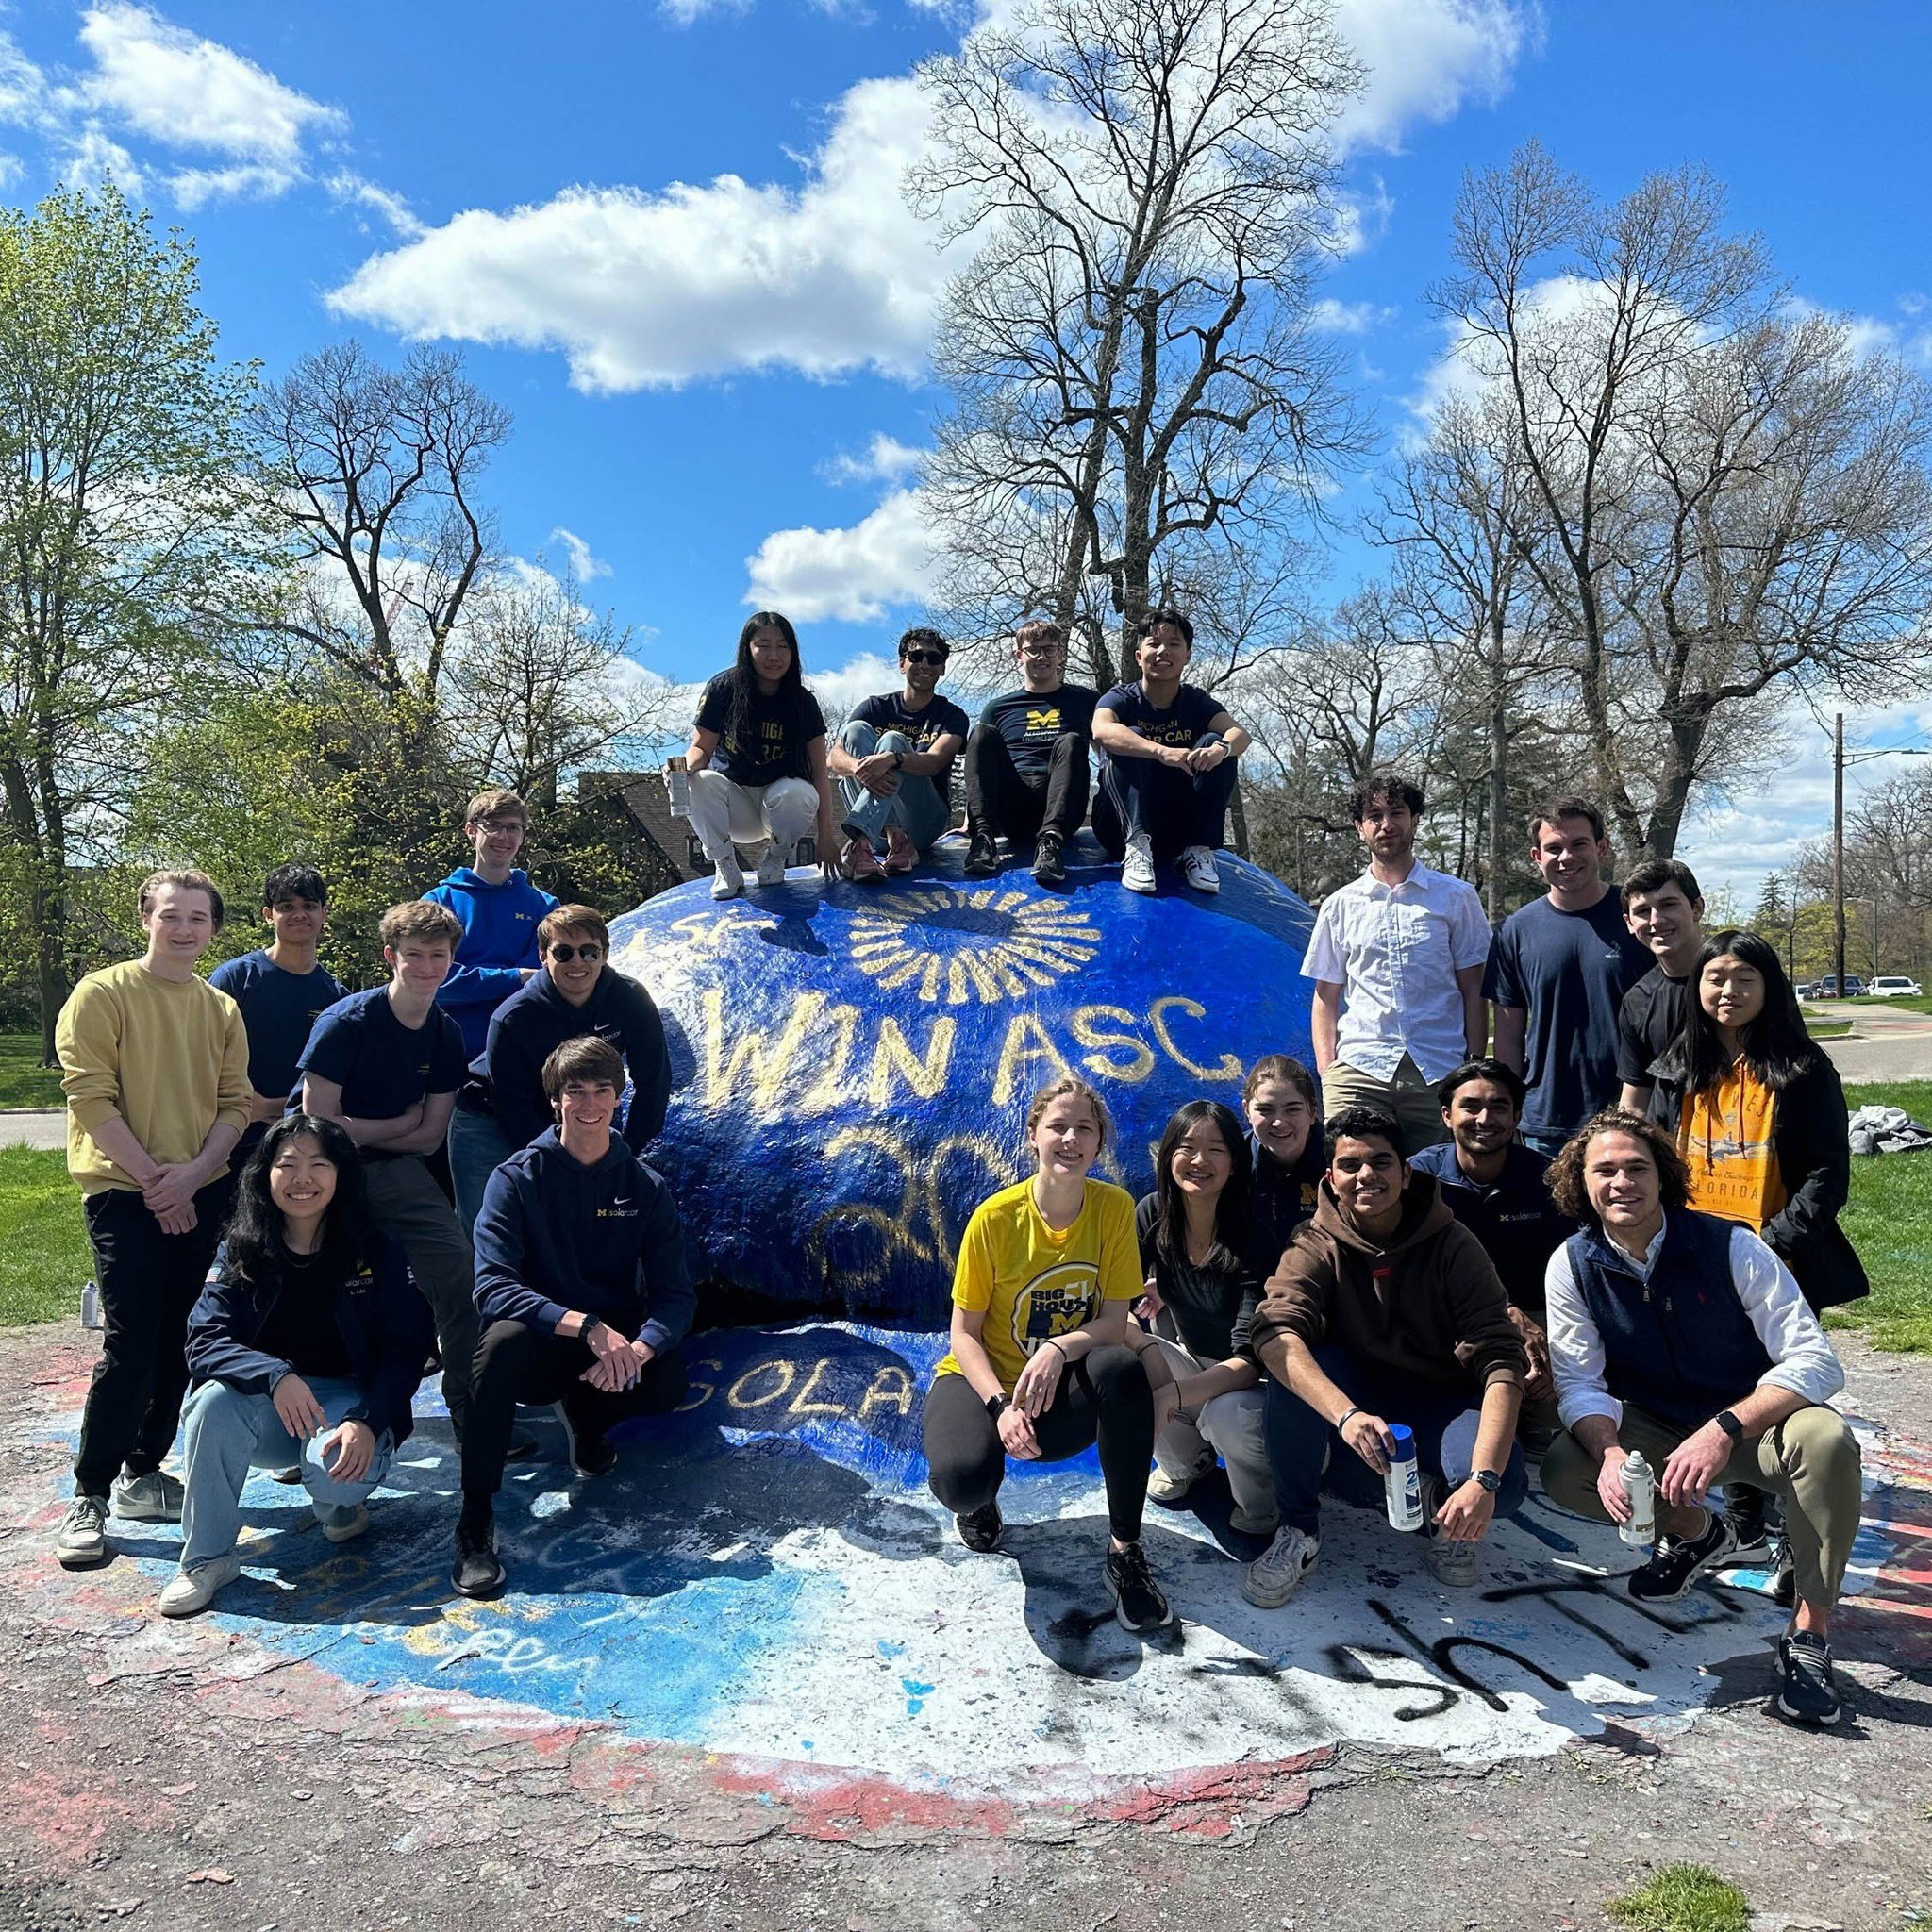 Last Sunday was our last full team meeting of before summer. After a wonderful banquet and some fond reminiscing about our time on the team this year, we headed down to Central Campus to spend a final afternoon together painting the rock. Here's to a